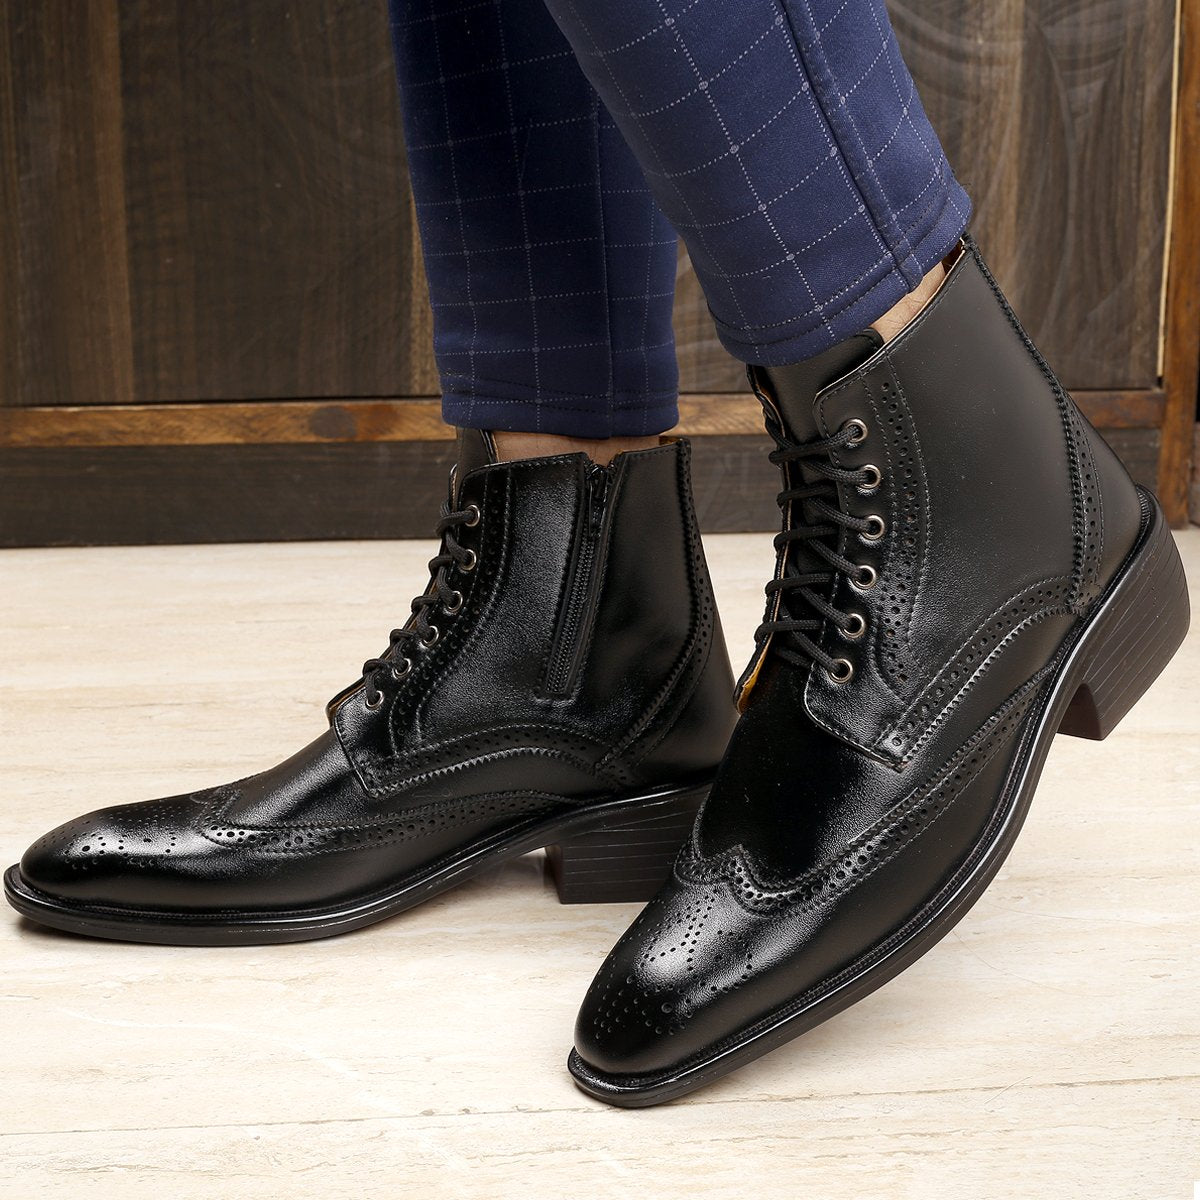 Ankle Zipper Lace-Up Brogue Boots